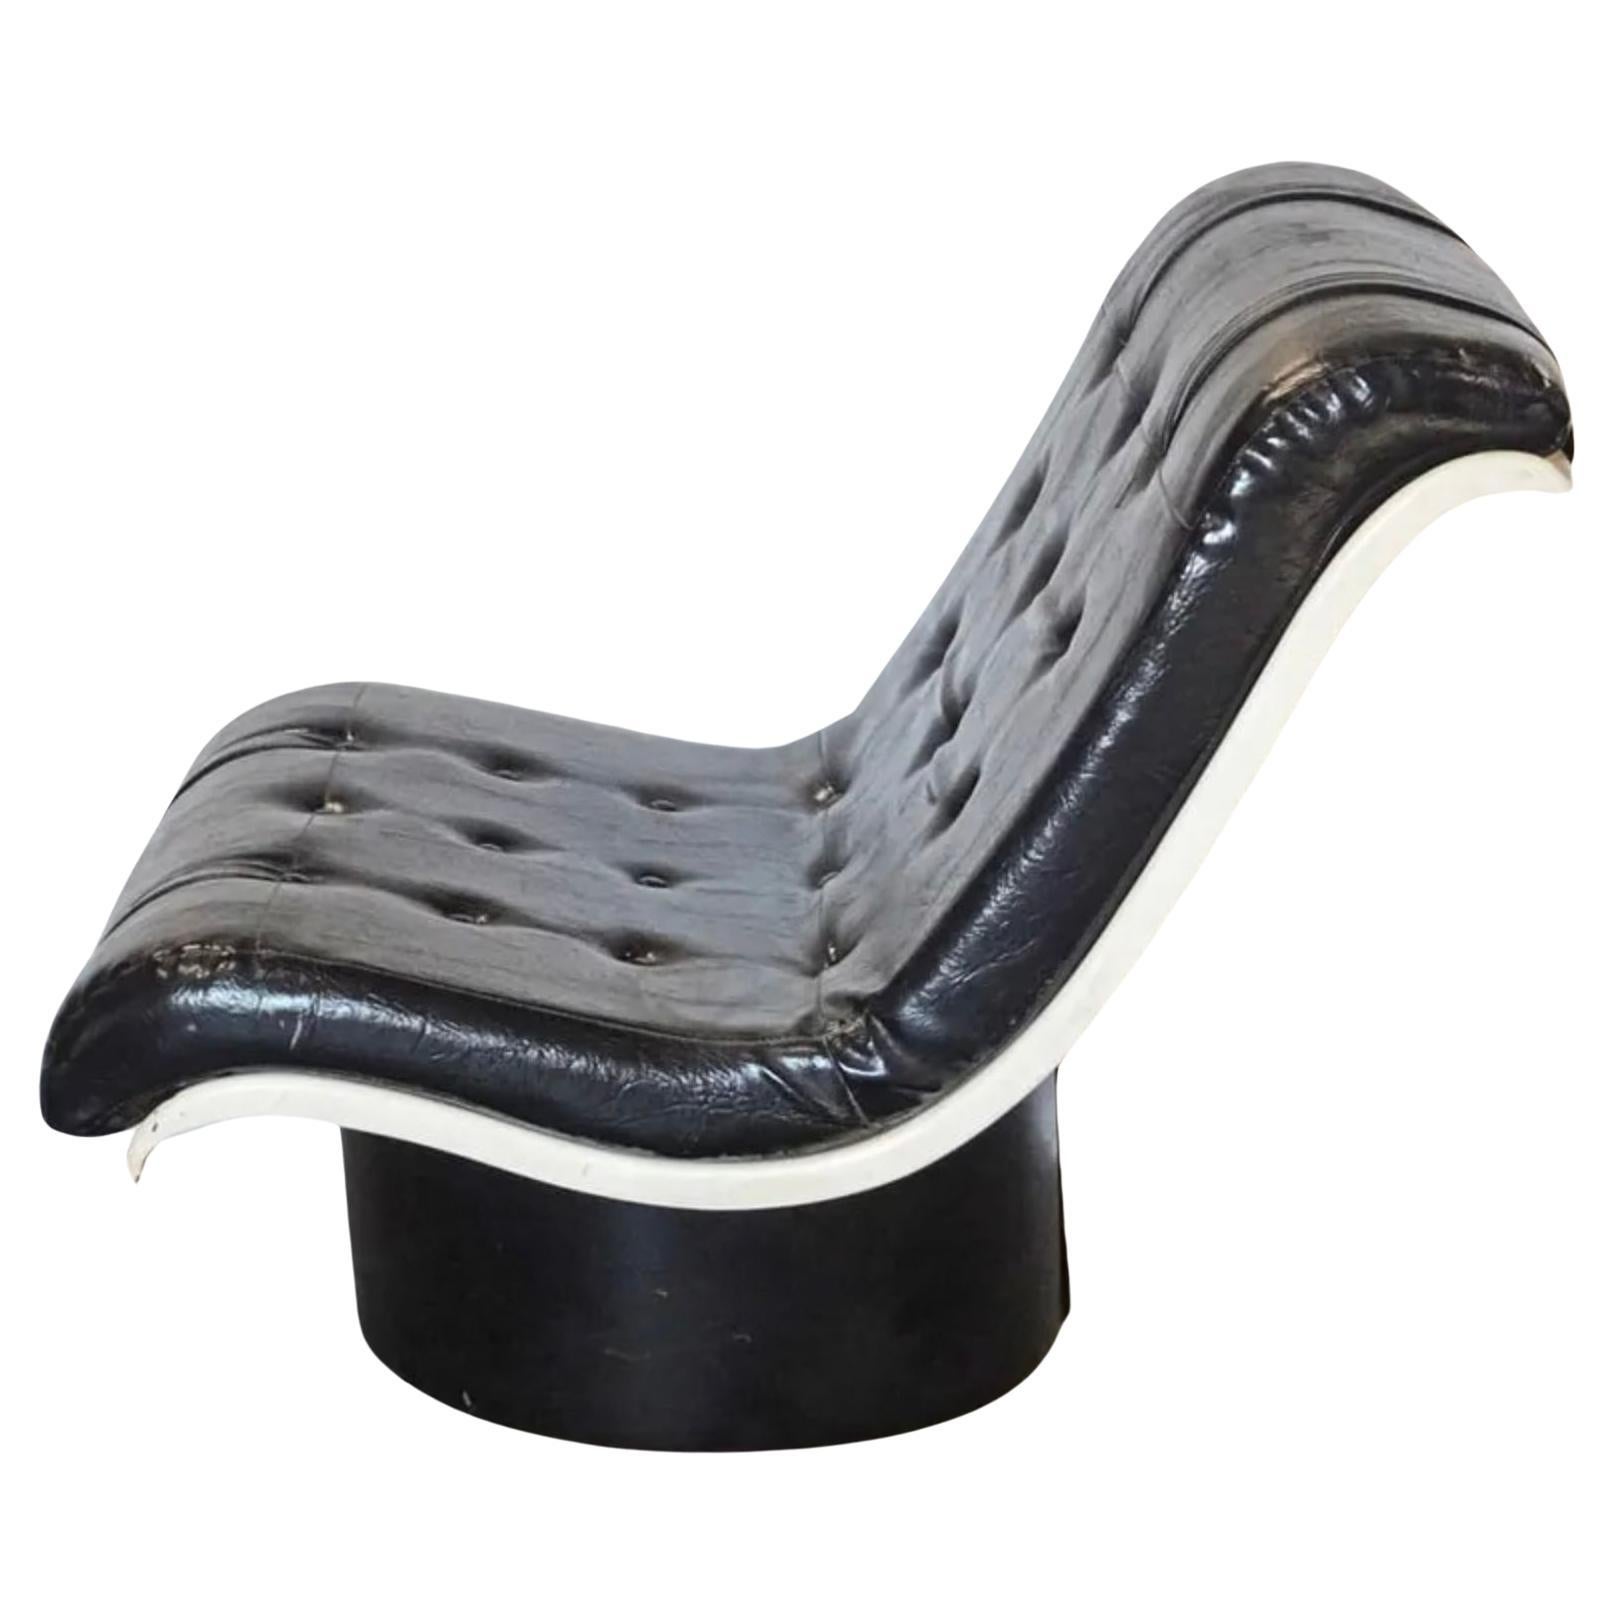 Mid century Space Age Pop Art 1970s futuristic lounge chair by pioneer furniture designer Morris Futorian (1907-1994). molded plastic frame with button tufted black Vinyl upholstery on black cylinder base. Located in Brooklyn NYC.

30